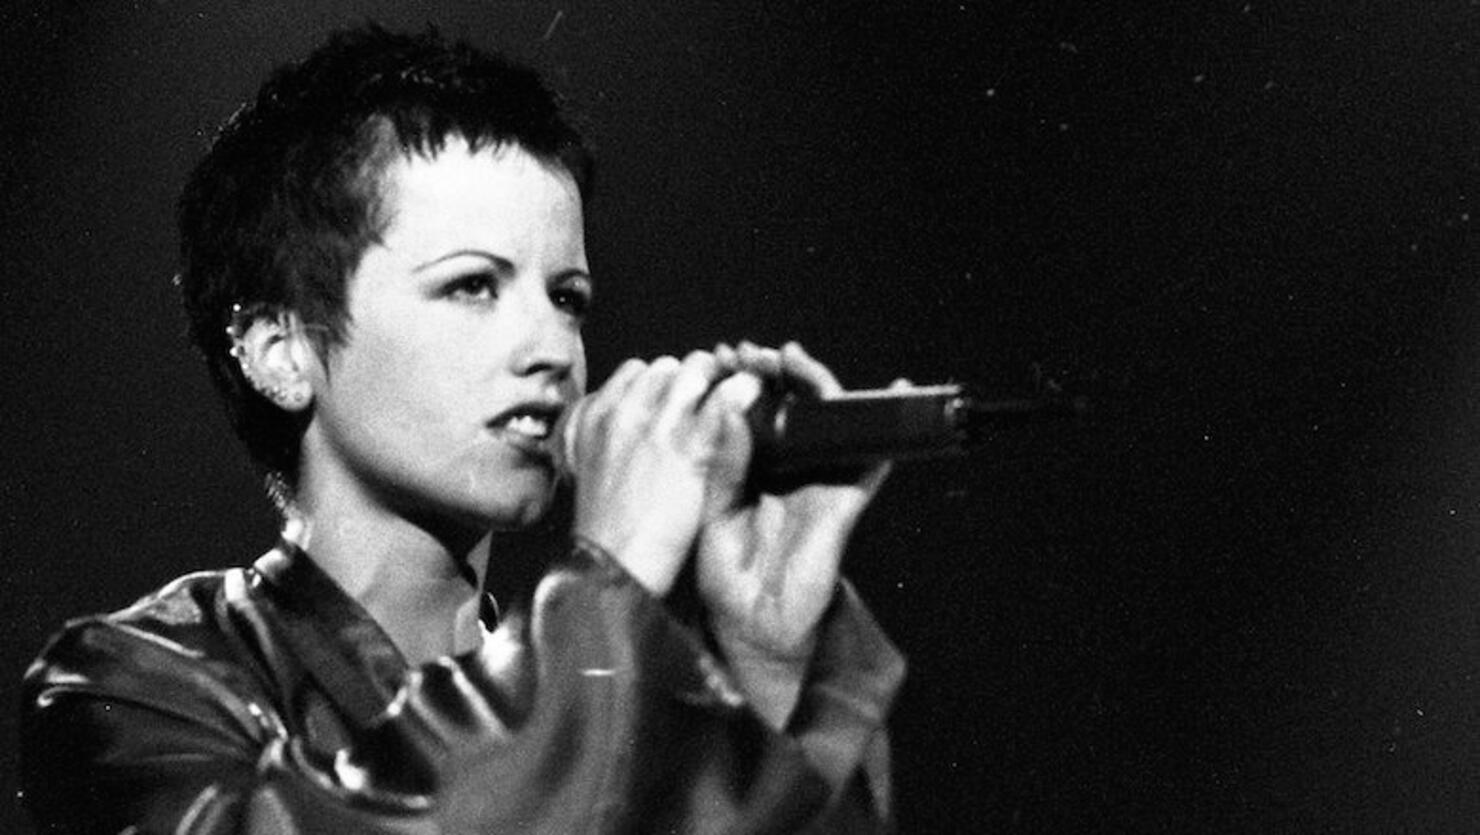 dolores o'riordan cause of death drowning